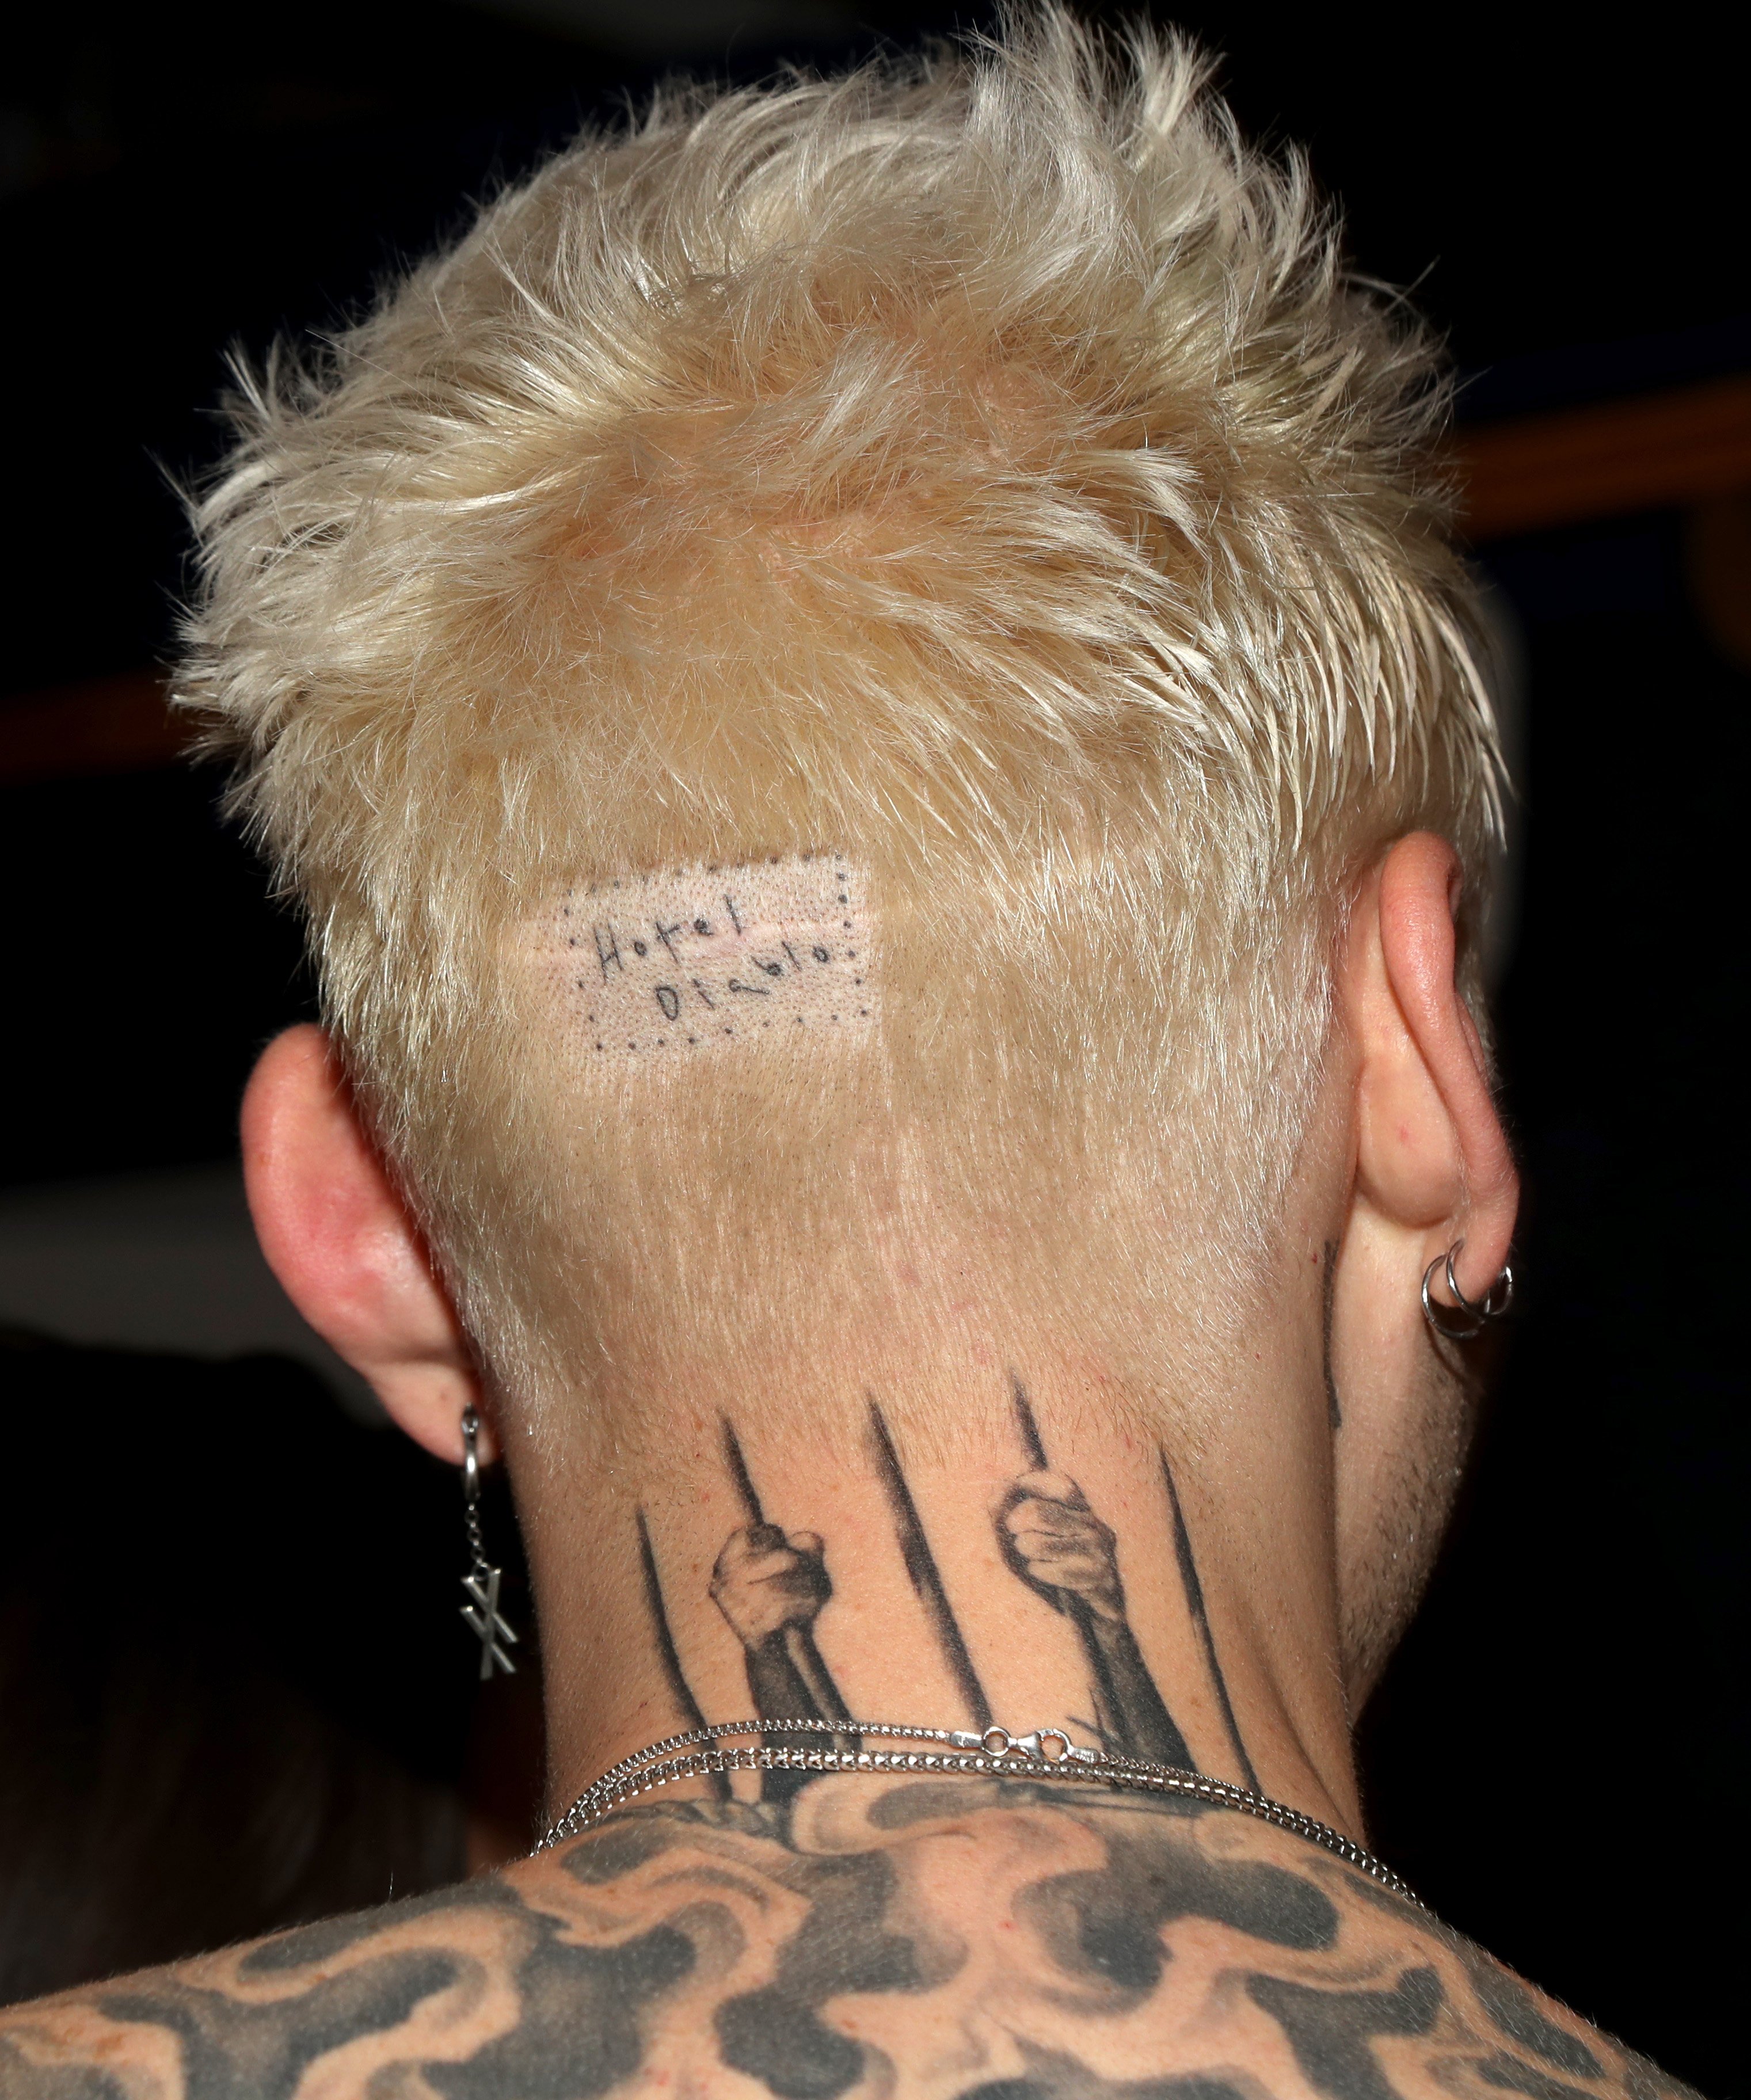  Machine Gun Kelly's tattoo detail on his head. | Source: Getty Images